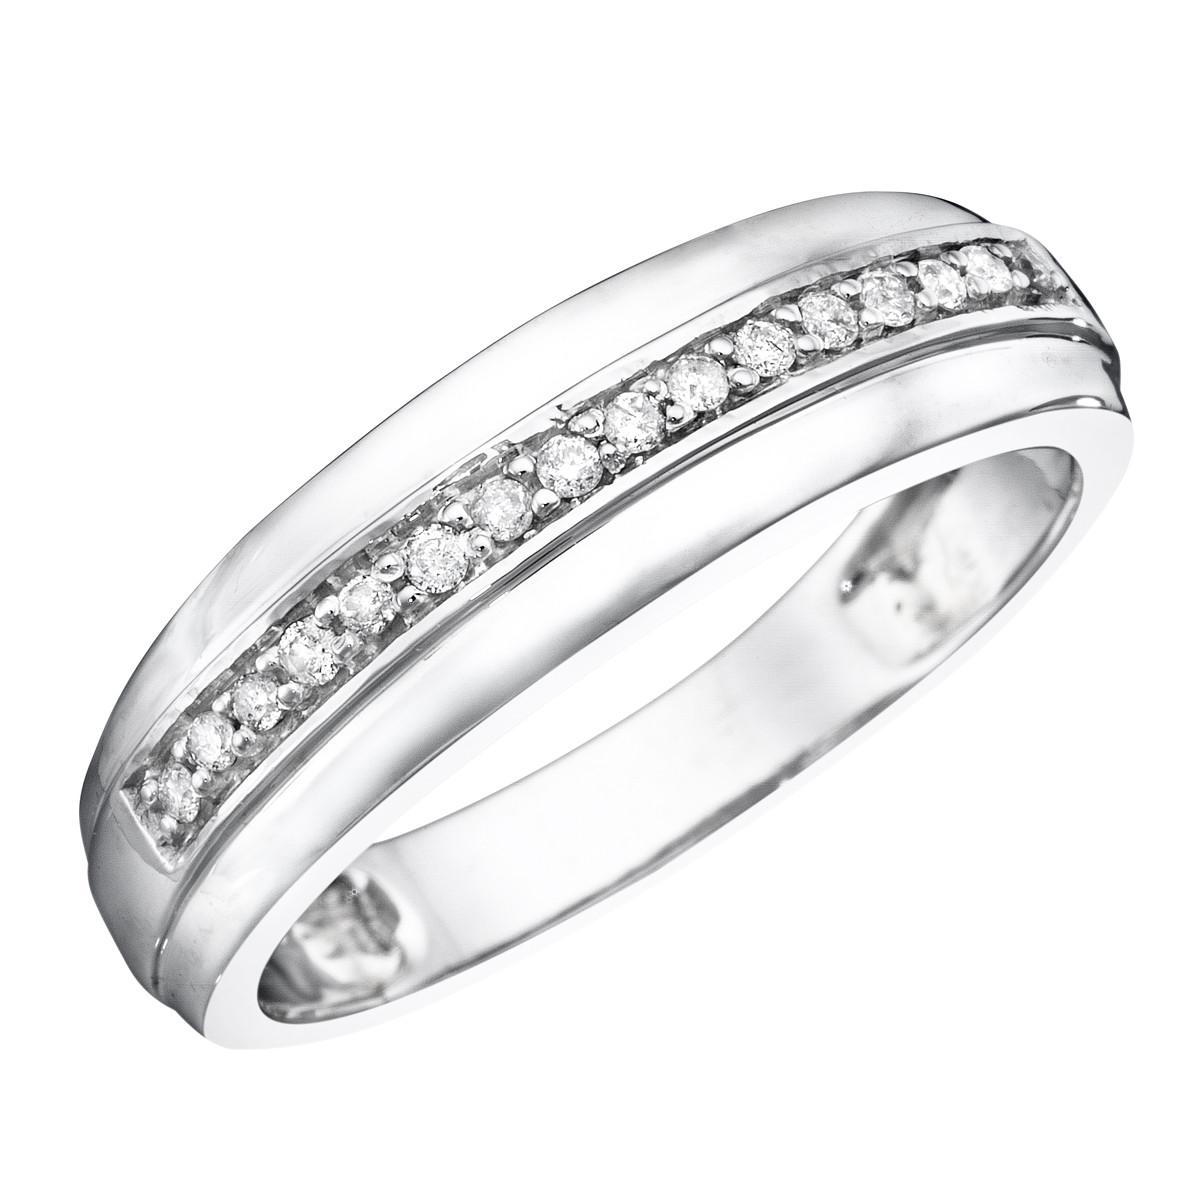 Mens Wedding Band White Gold
 Gold 14K White Gold Gold purity is measured in karats